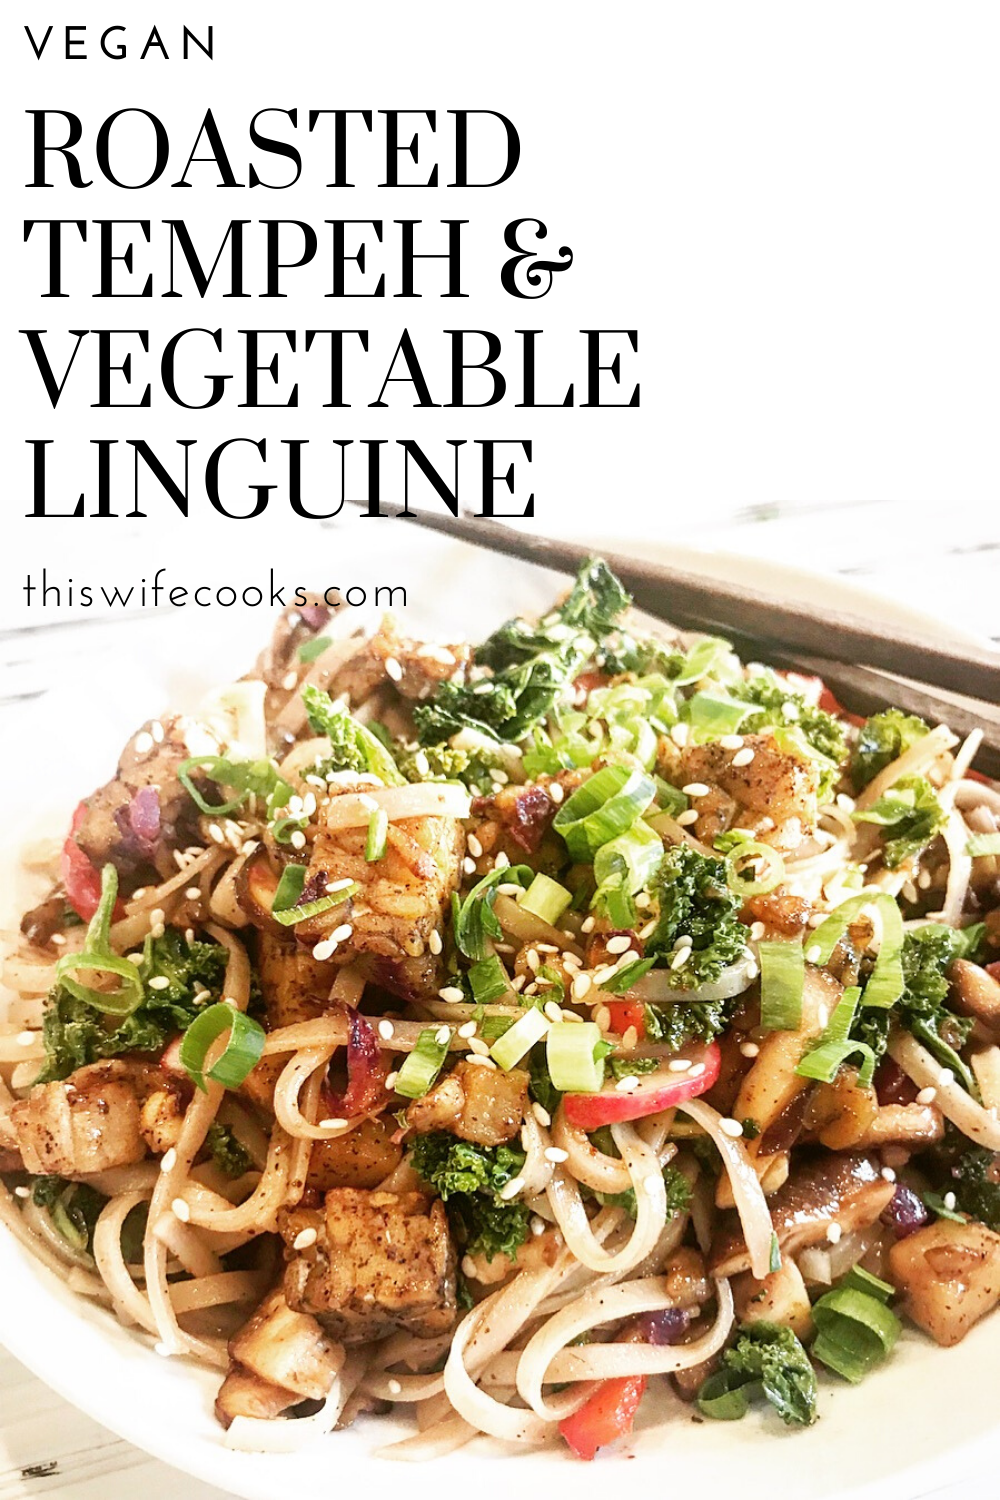 Roasted Tempeh & Vegetable Linguine Bowl - Roasted tempeh and turnips, shiitakes and red bell peppers, scallions, cabbage, kale, and radishes... all tossed together in a spicy sriracha hoisin sauce. via @thiswifecooks